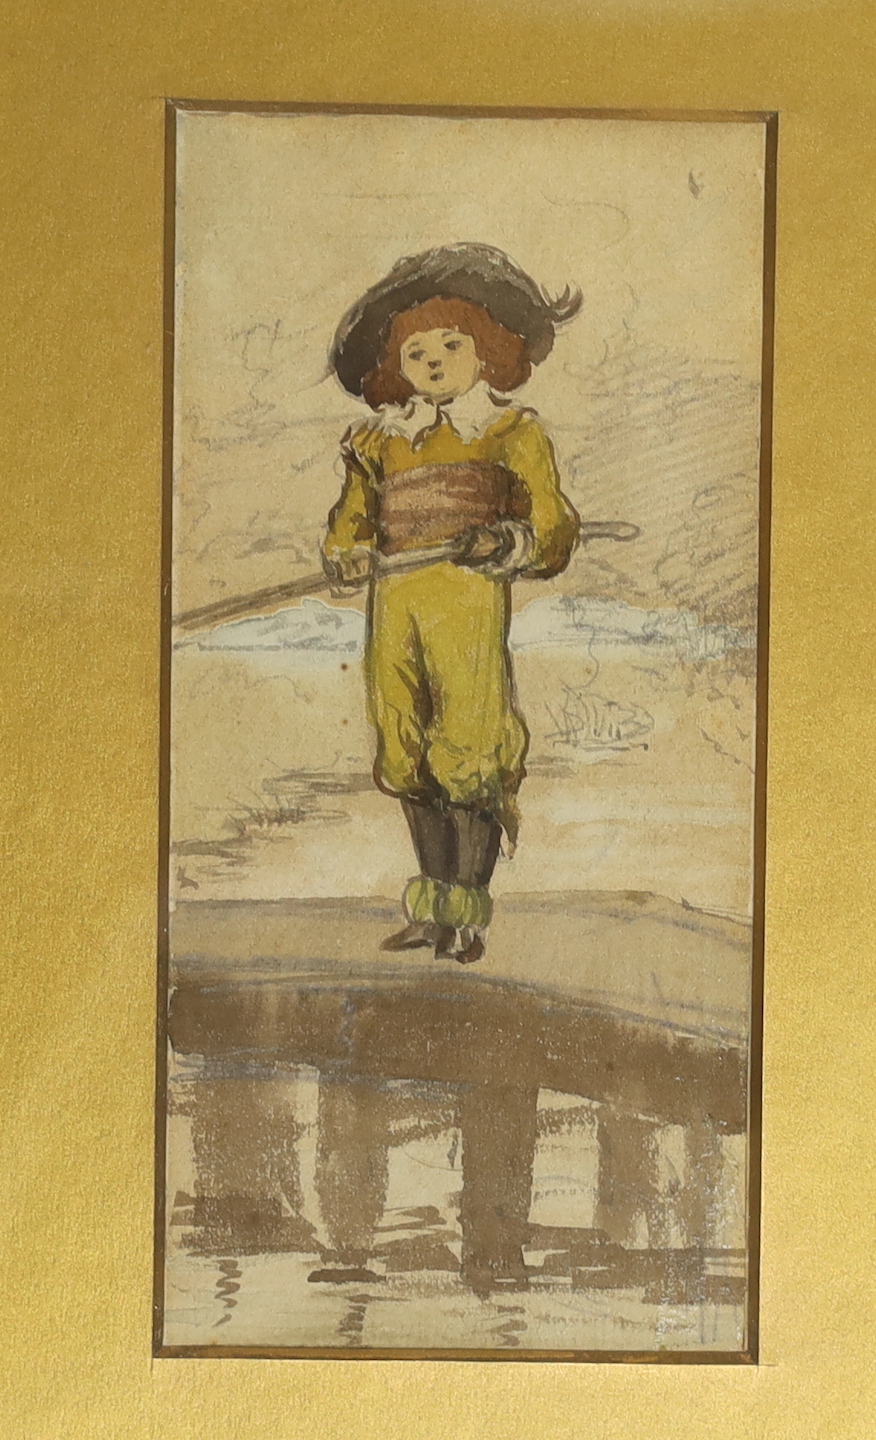 Charles Trevor Garland (1851-1906), two watercolours, Dog and cat and Boy angler, one signed and dated Jan '79, largest 12 x 17cm. Condition - fair